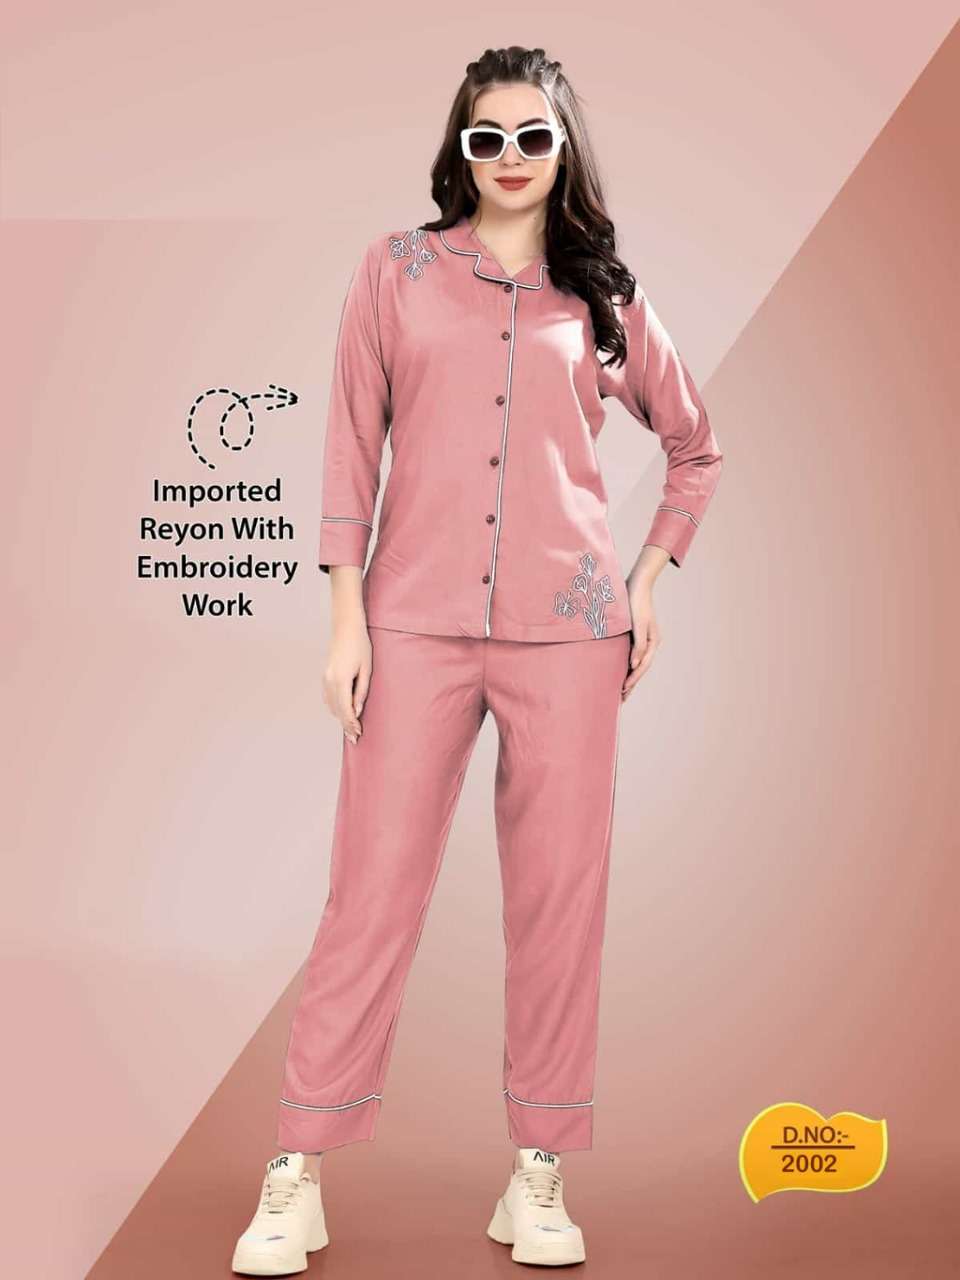 SLEEPWELL VOL 21 IMPORTED ITALIAN REYON FRONT OPEN WITH EMBROIDERY WORK NIGHT SUITS BY S3FOREVER BRA...